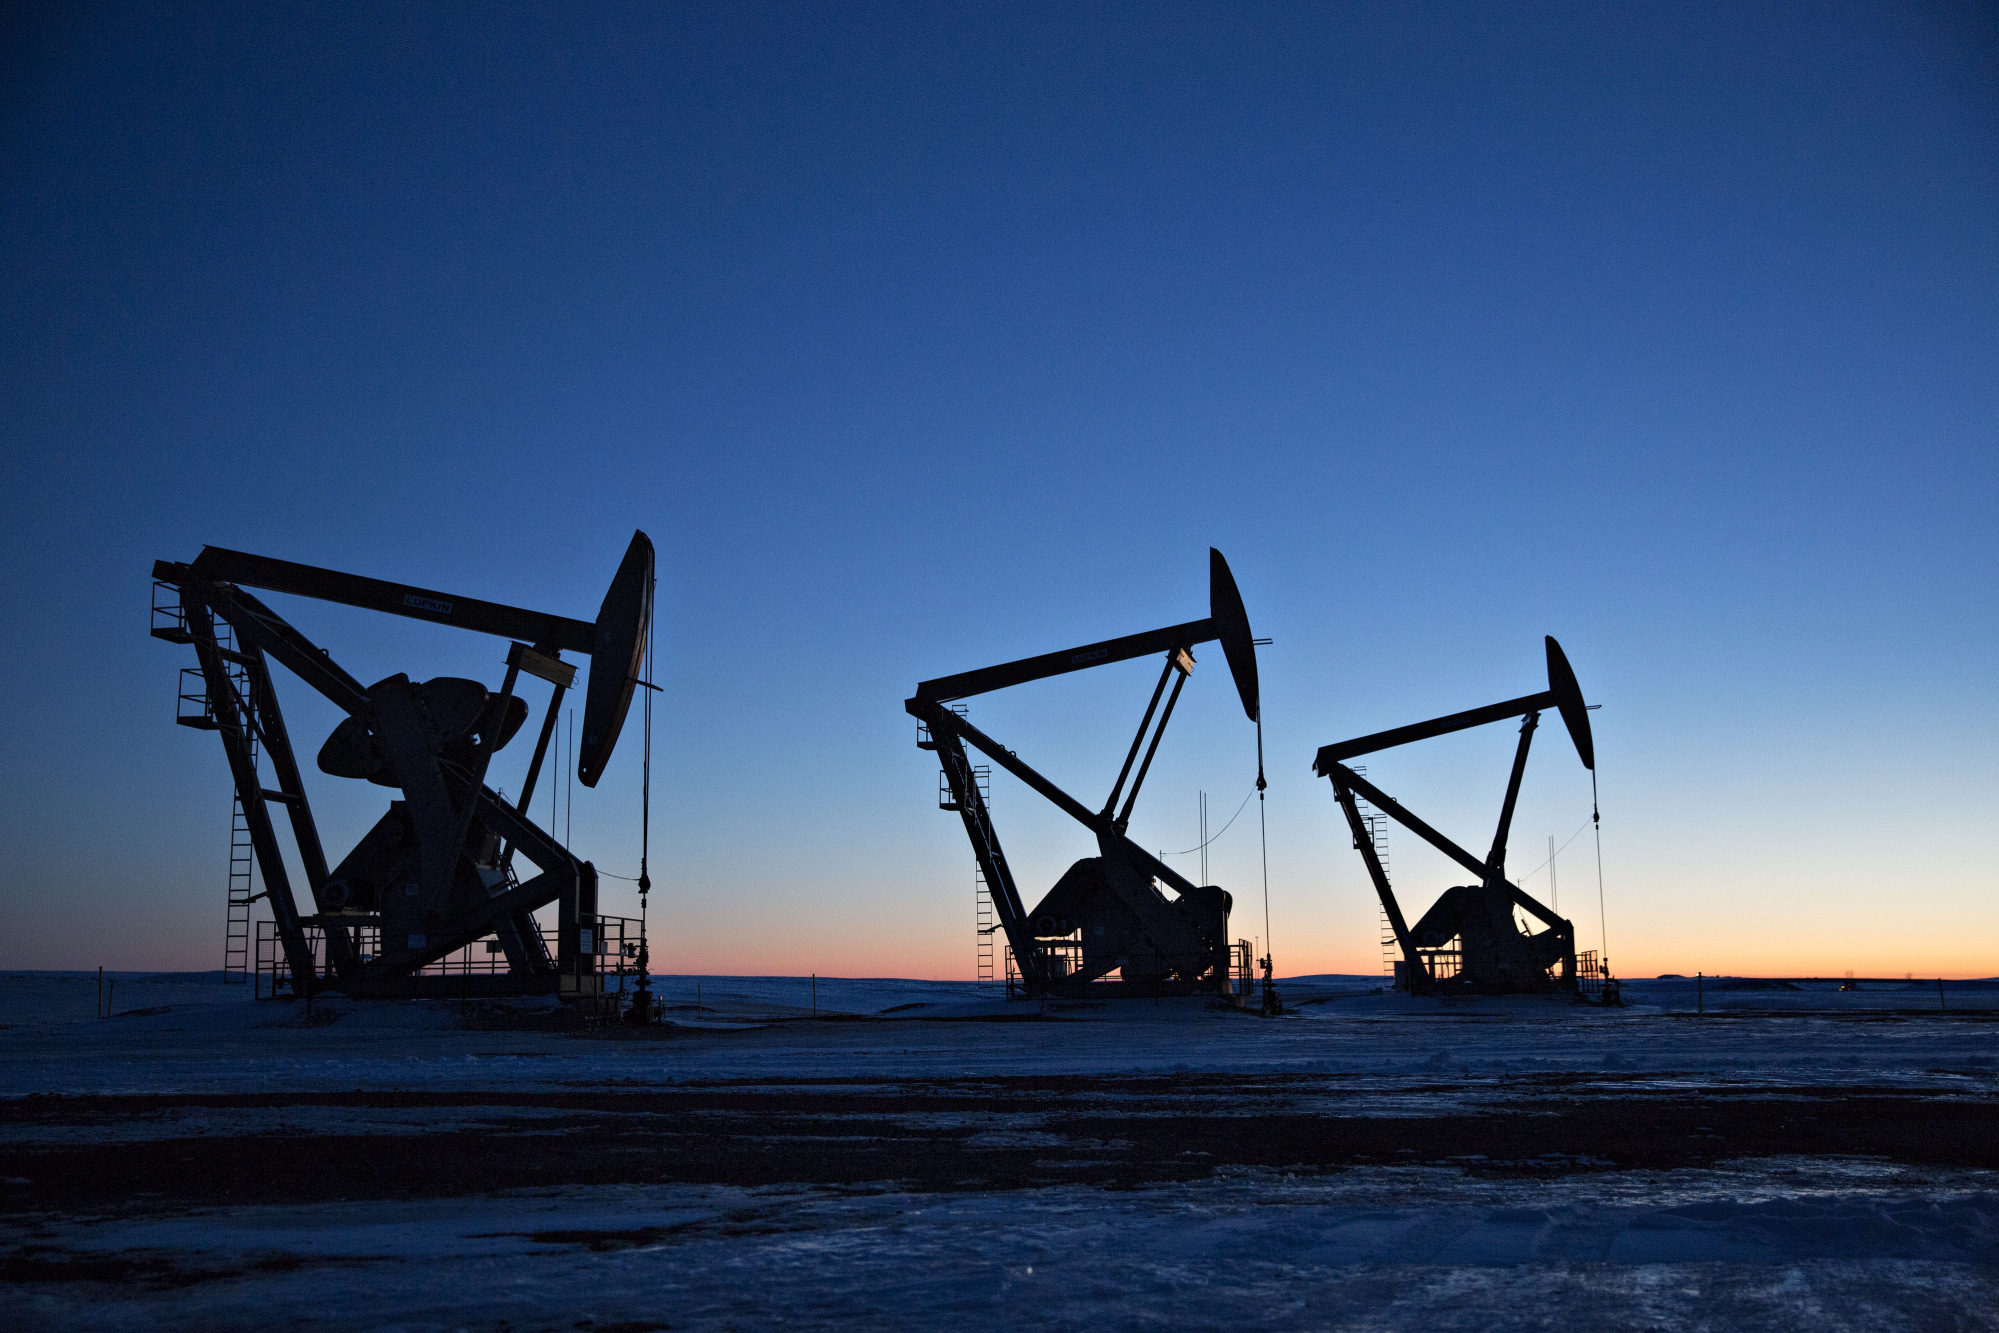 Silhouettes of pumpjacks are seen above oil wells in the Bakken Shale formation near Dickinson, North Dakota, the United States, Wednesday, March 7, 2018.